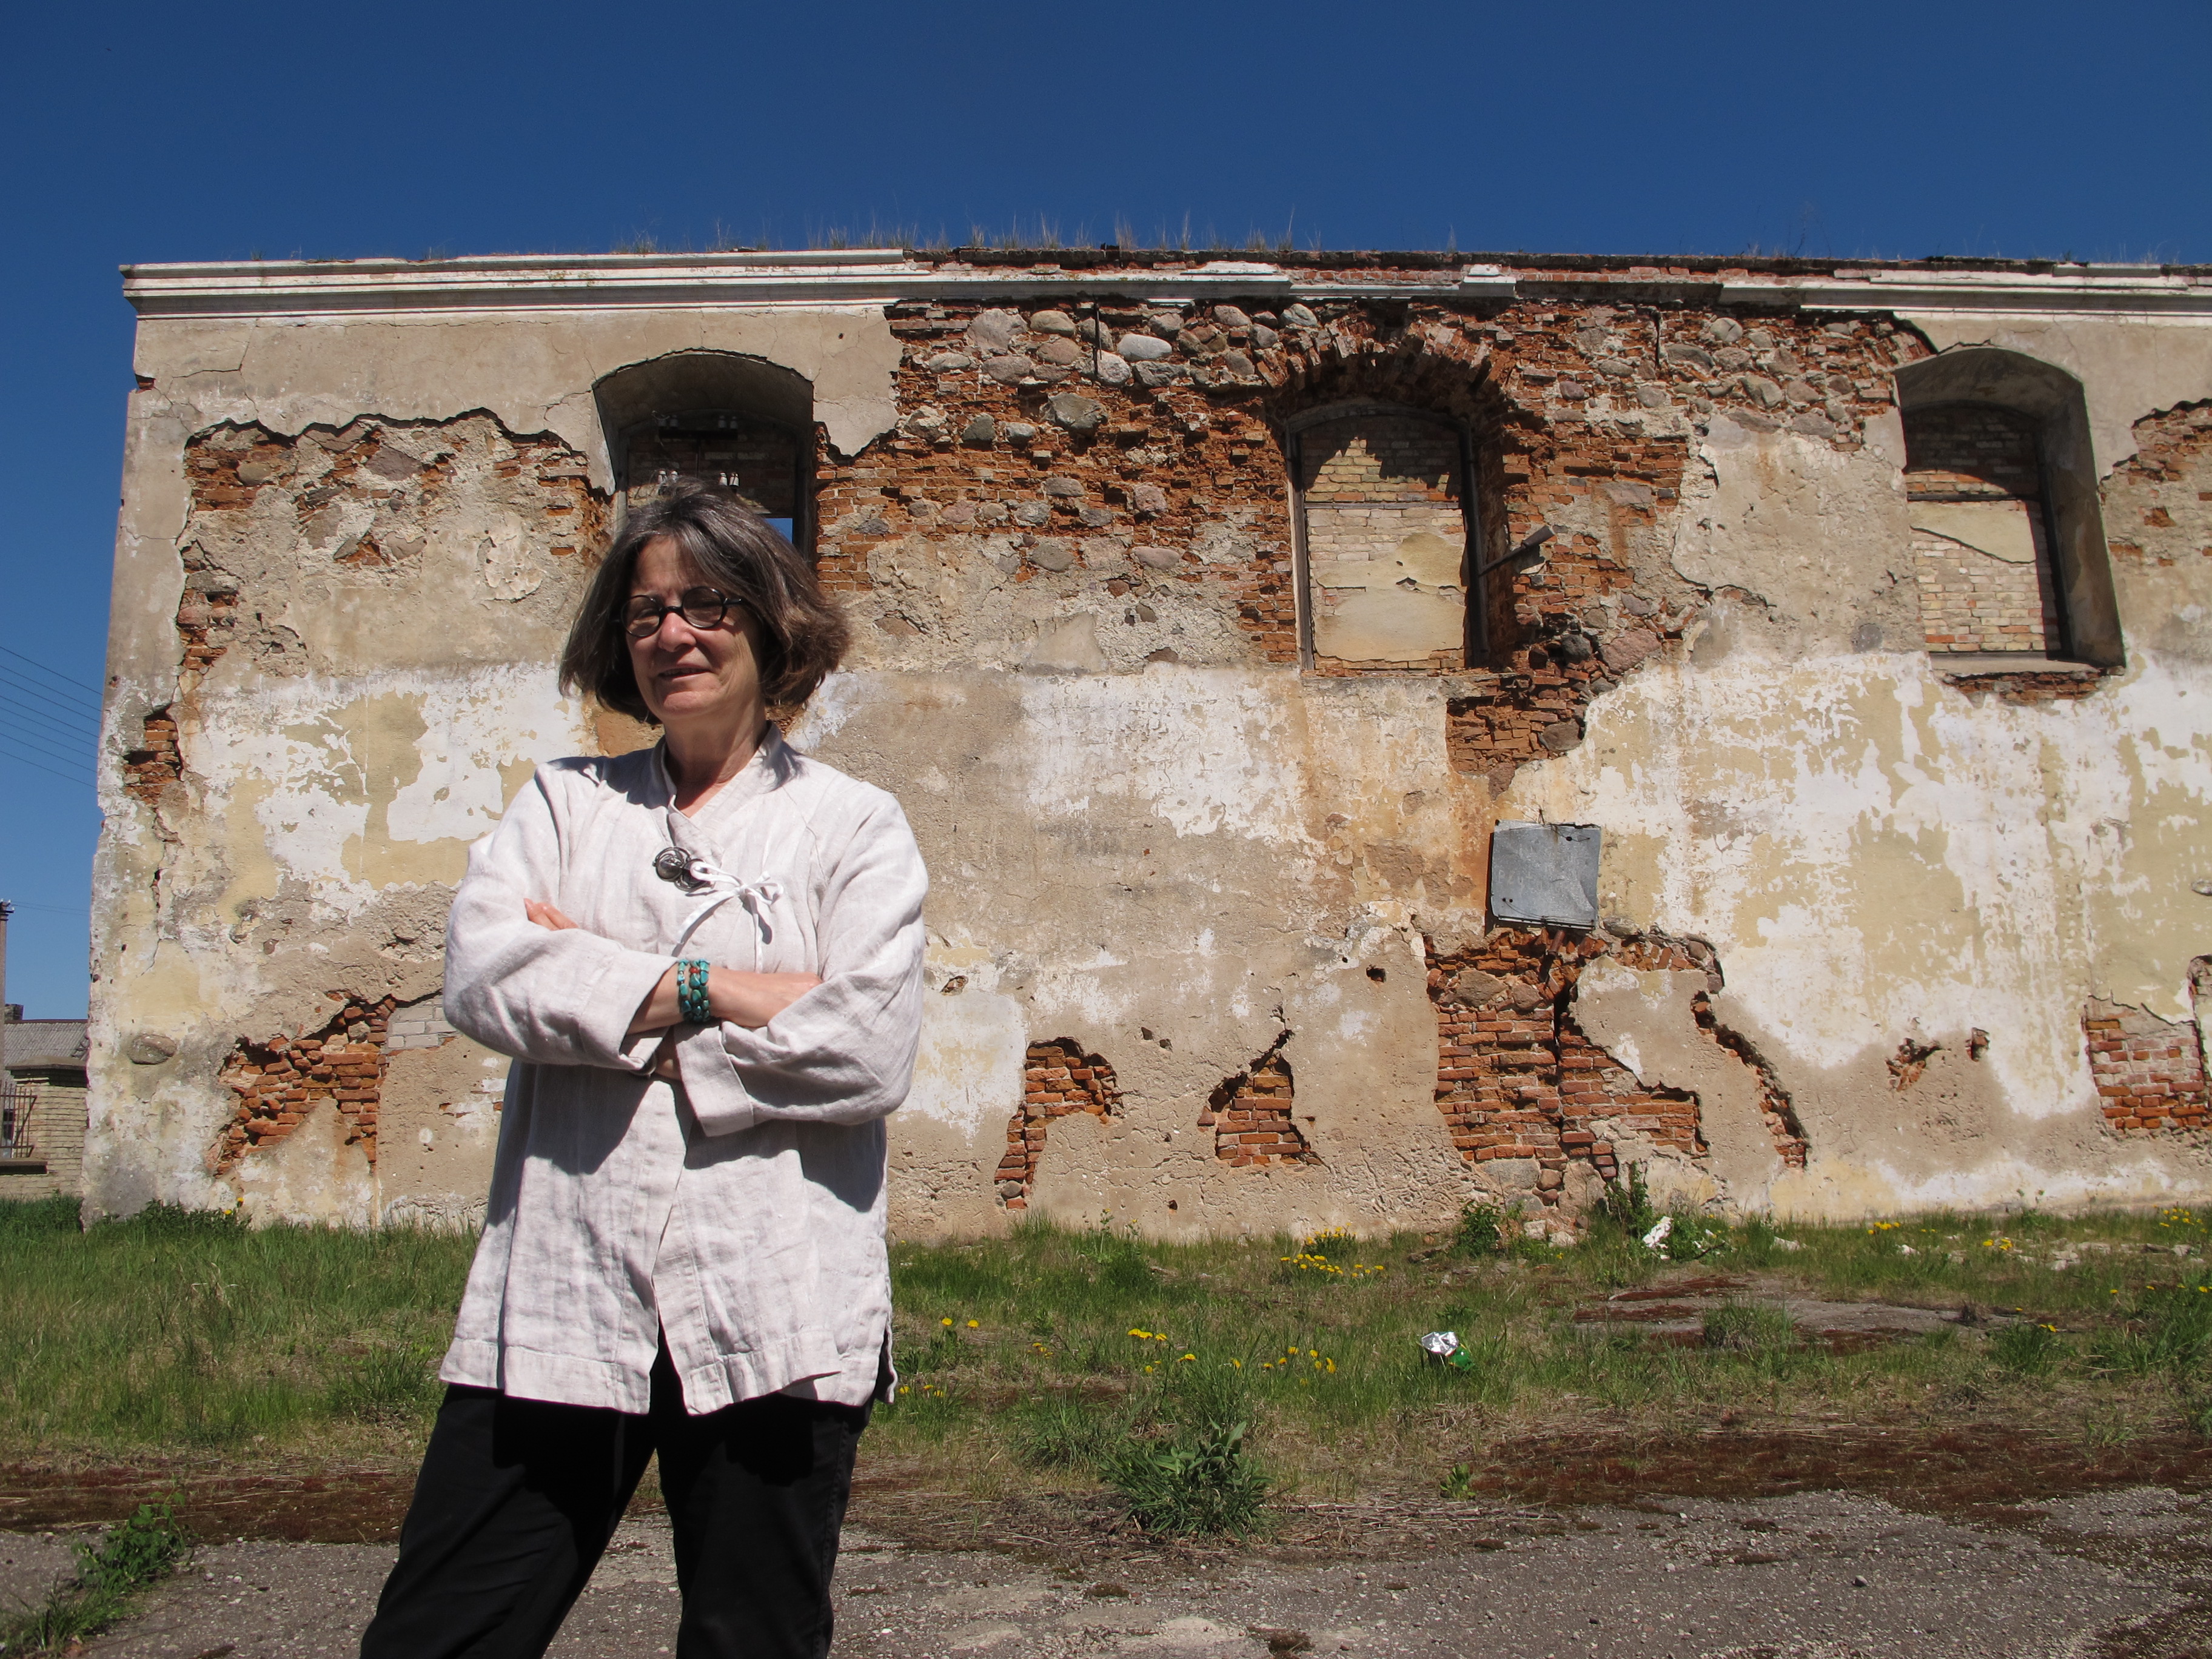 Me outside the ruined synagogue in Kalvarija, Lithuania, the town from which by great-grandparents emigrated to the US around 1880